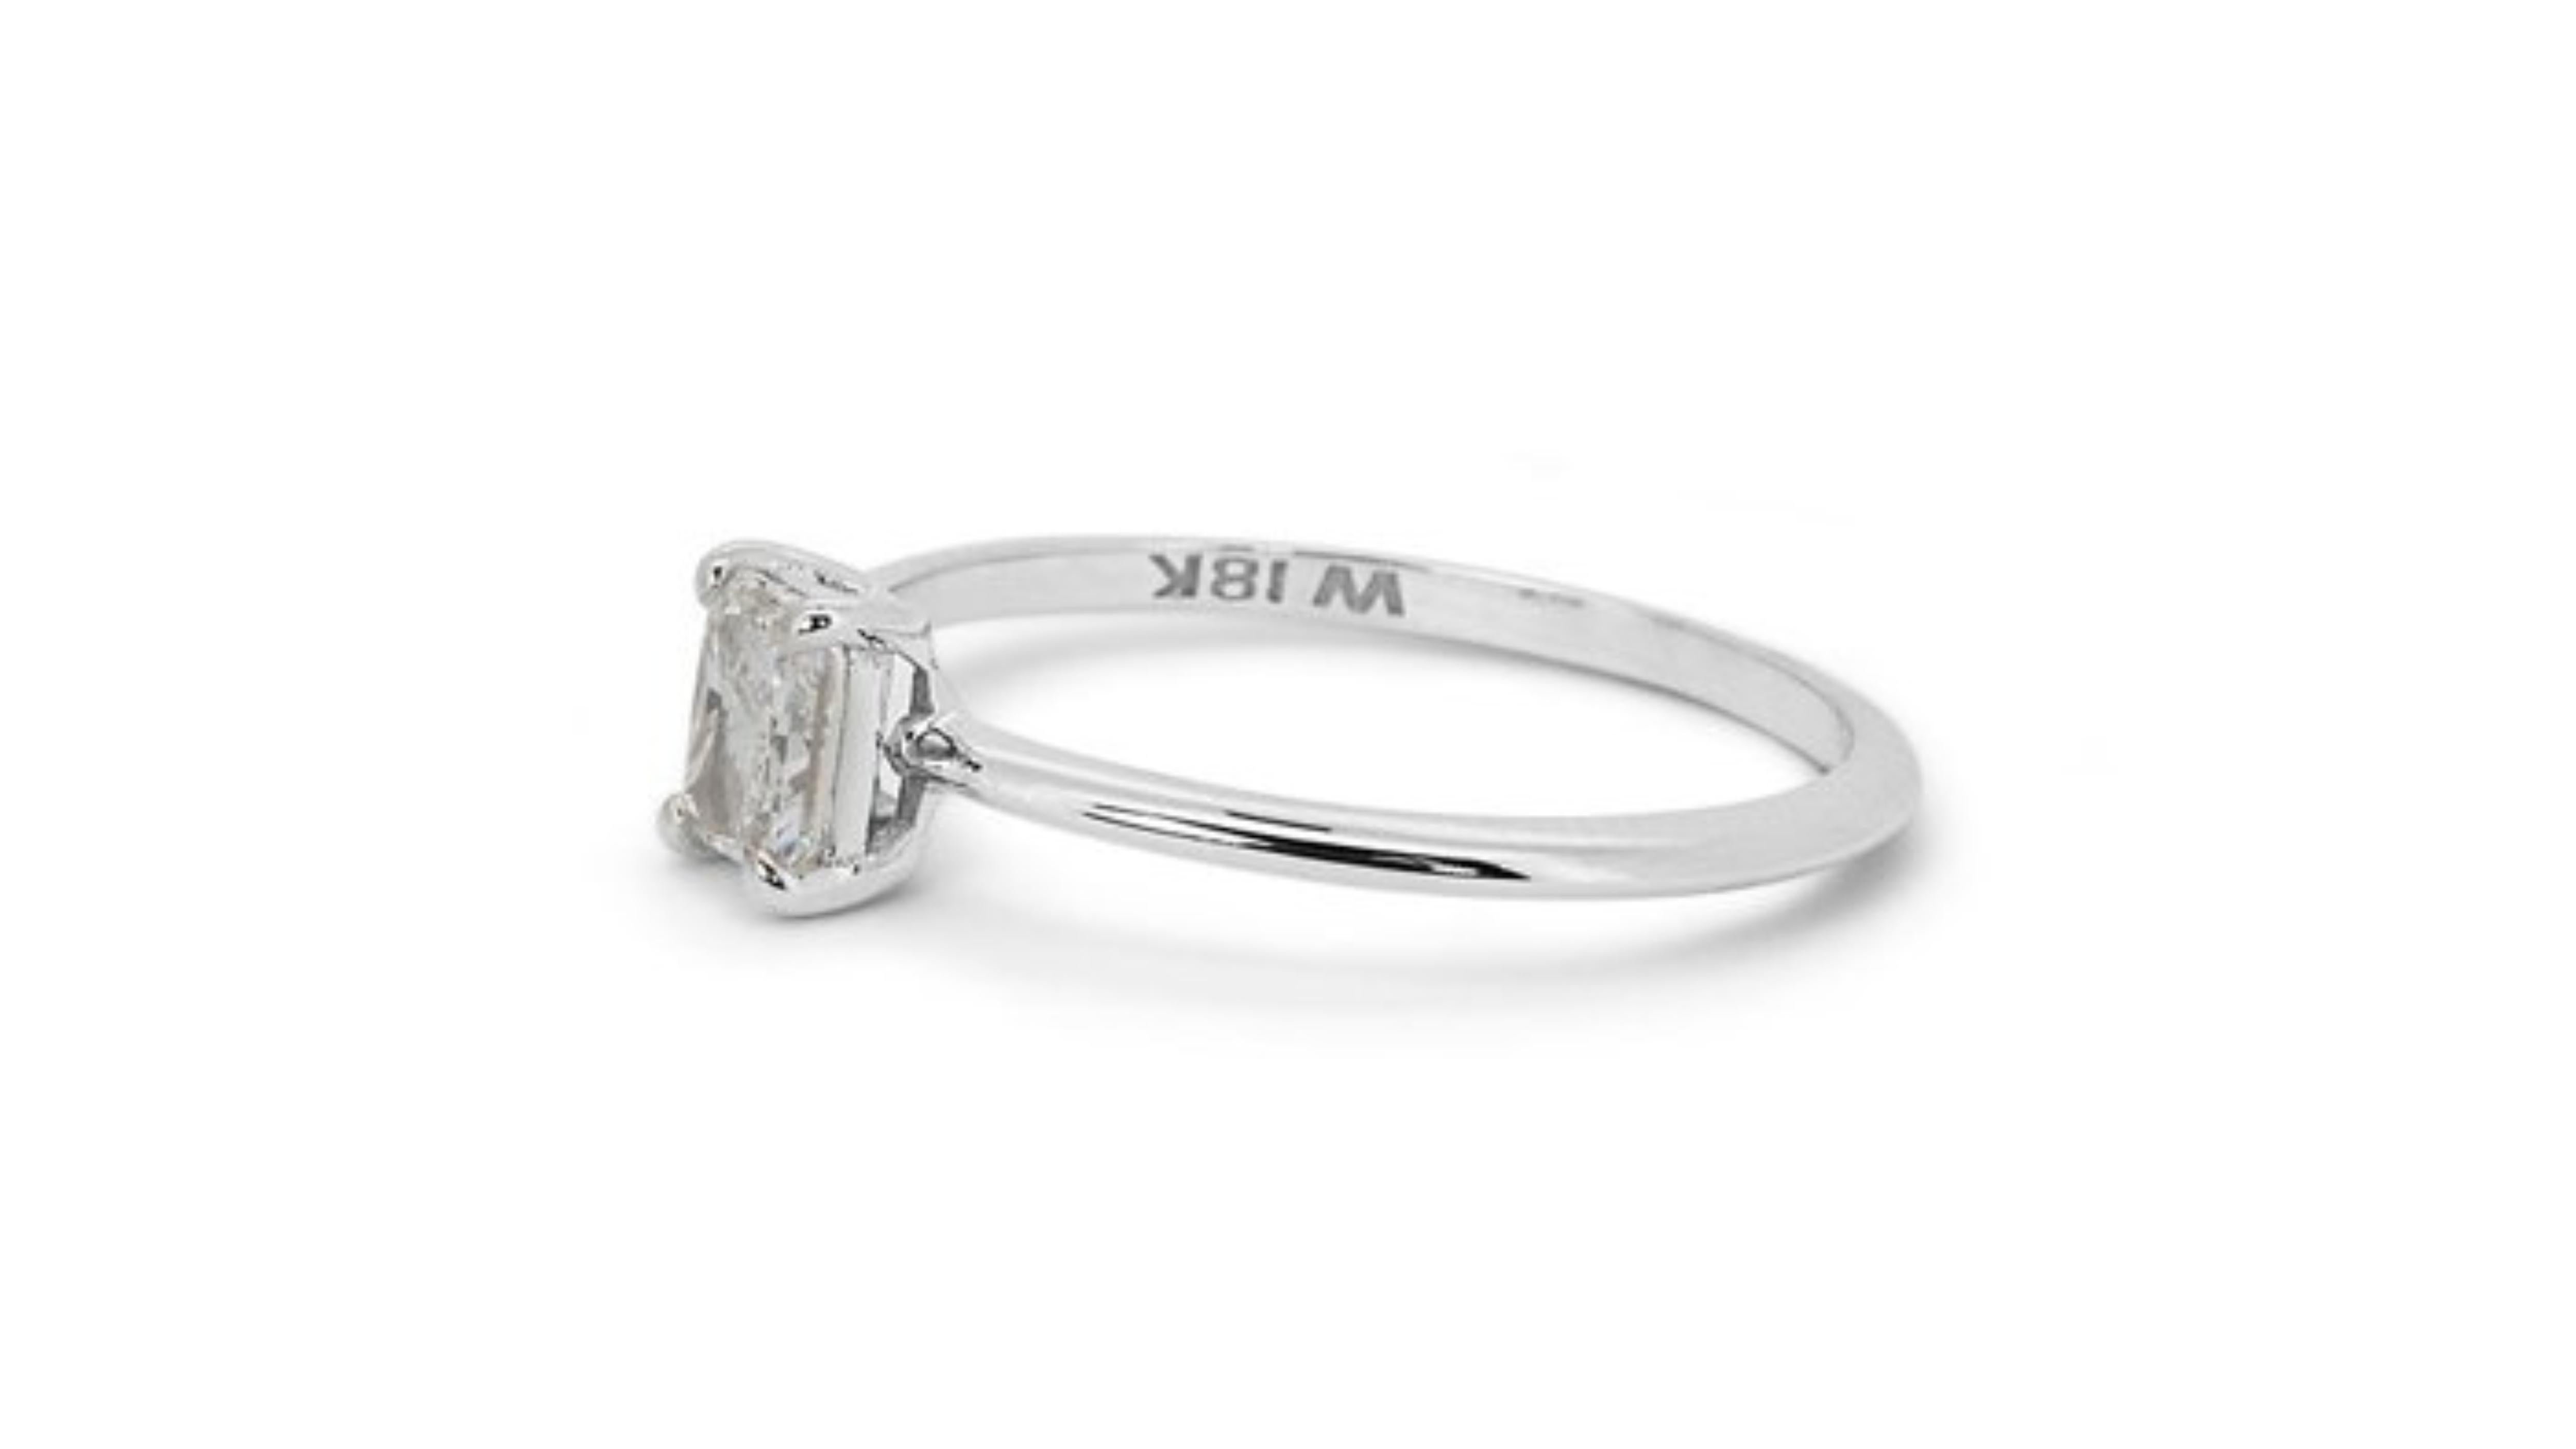 Sparkling solitaire ring with a dazzling 0.80-carat radiant natural diamond 3